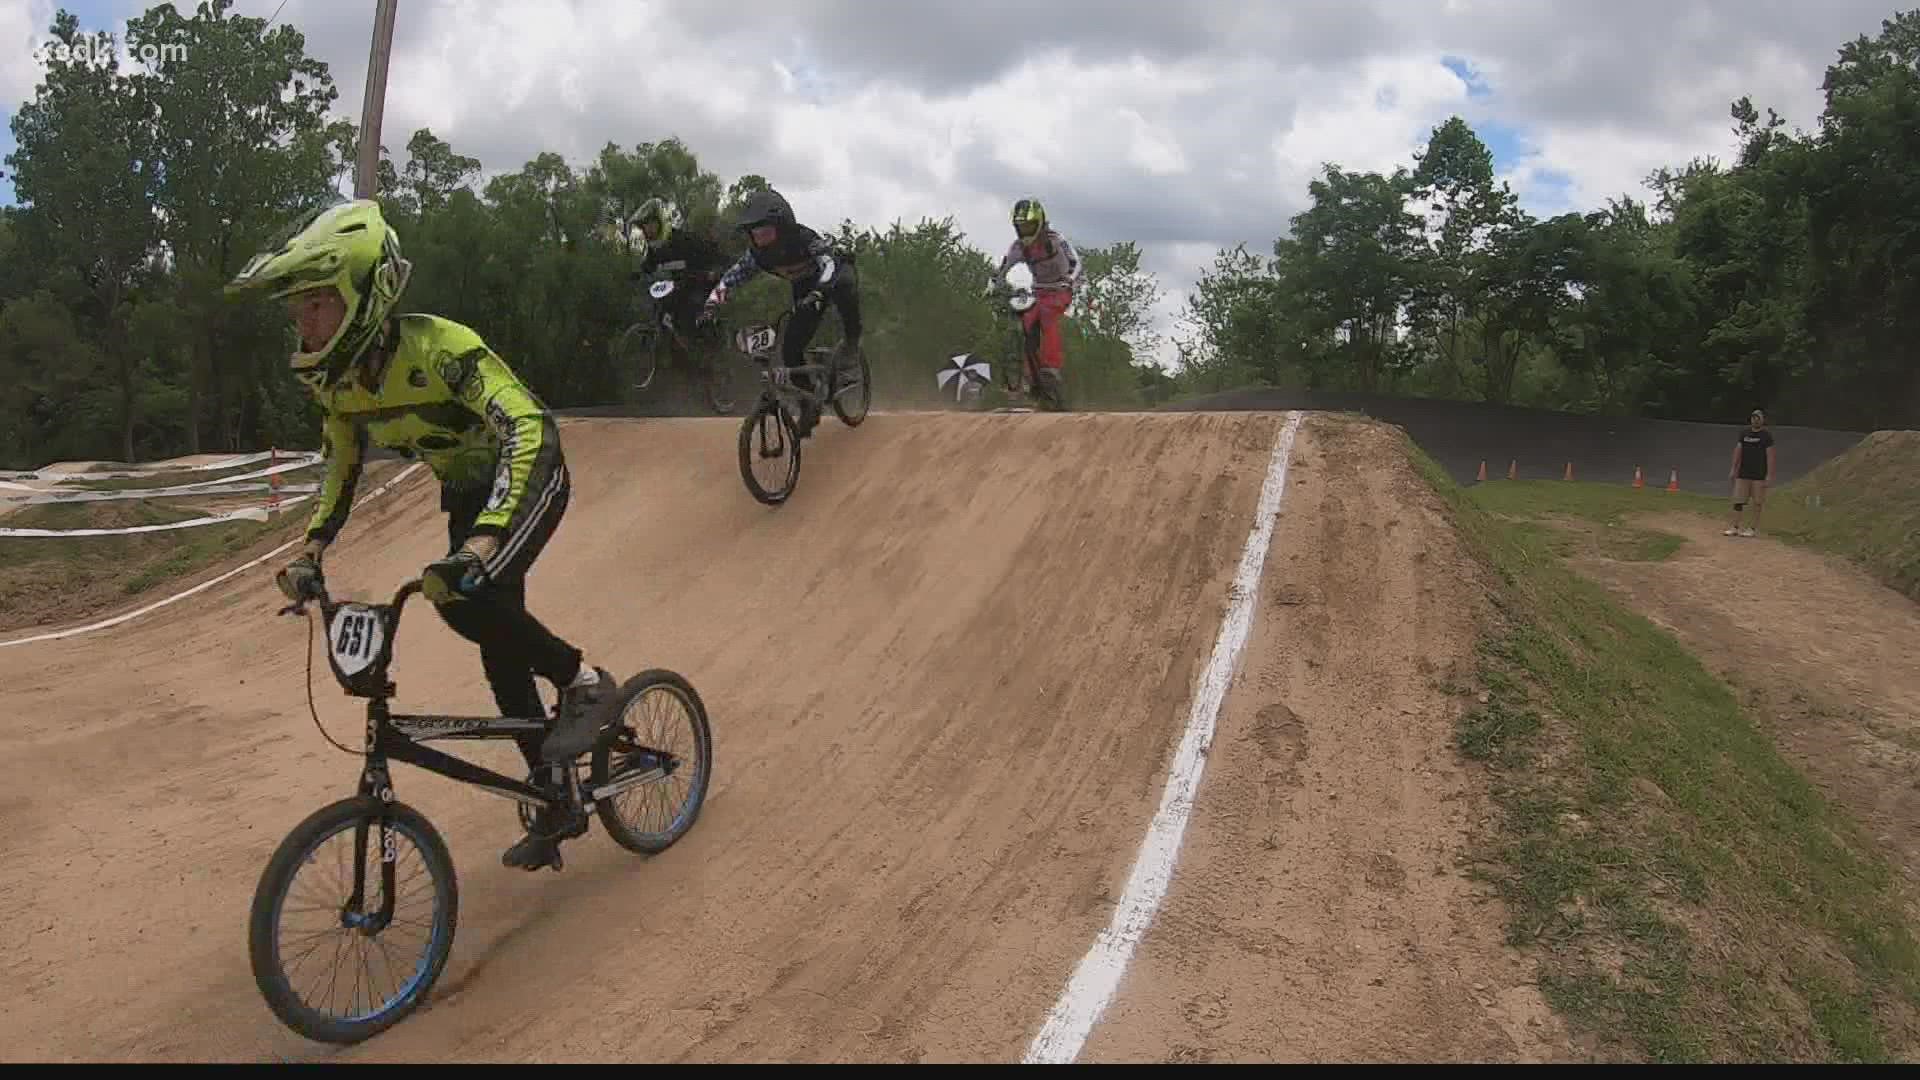 Kinetic Park is home to the largest pump track in the United States.